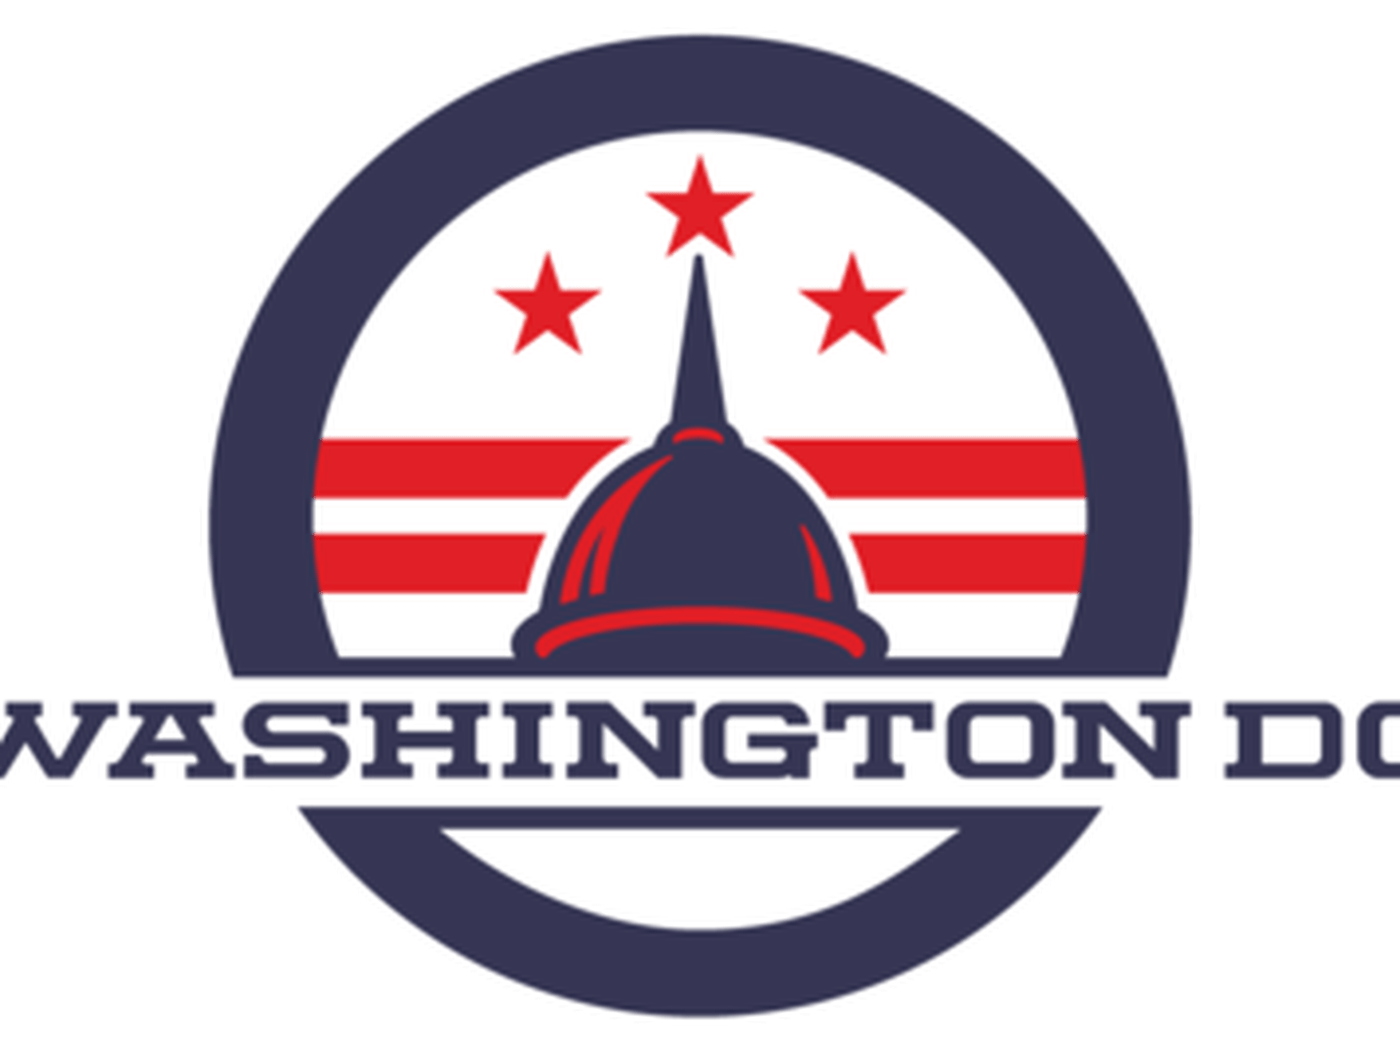 Washington DC Logo - More Pictures Of The Wizards New Jerseys And Logos - SB Nation DC